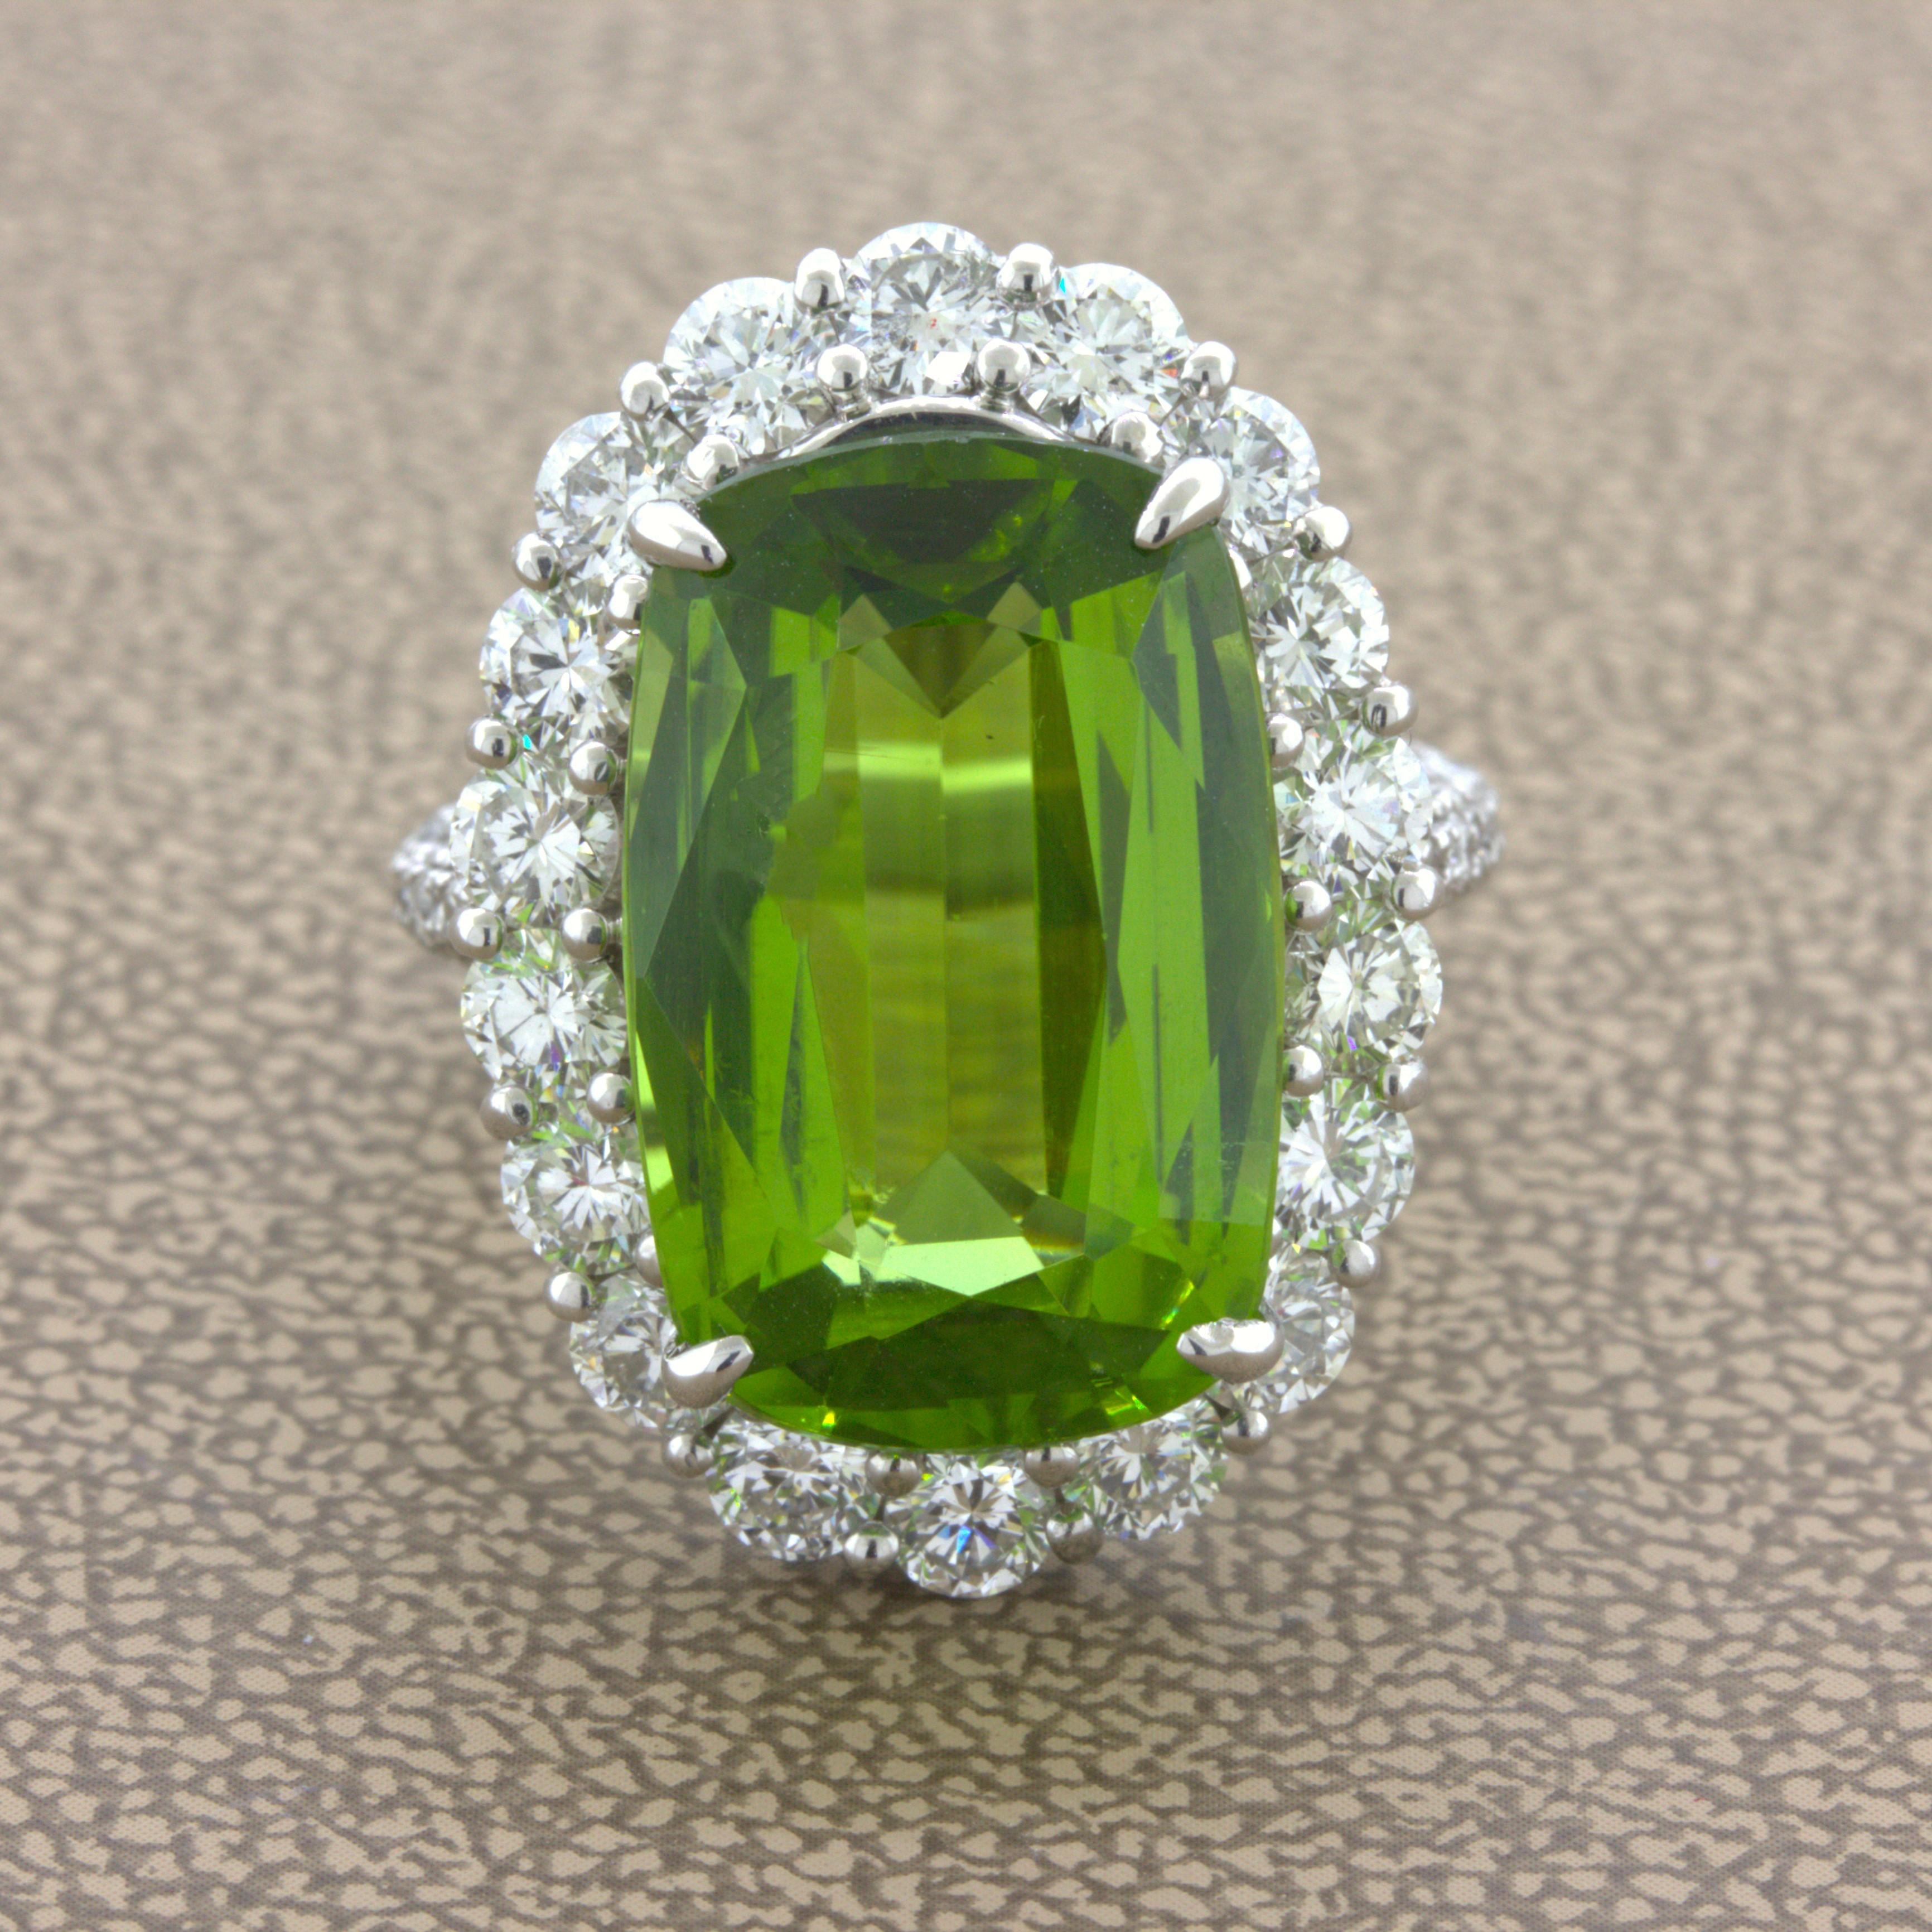 A classic diamond halo ring with a very fine gem peridot in its center. It weighs an impressive 11.52 carats and has a rich and lively green color with a touch of yellow which peridot is known for. Adding to that, it has a lovely, elongated